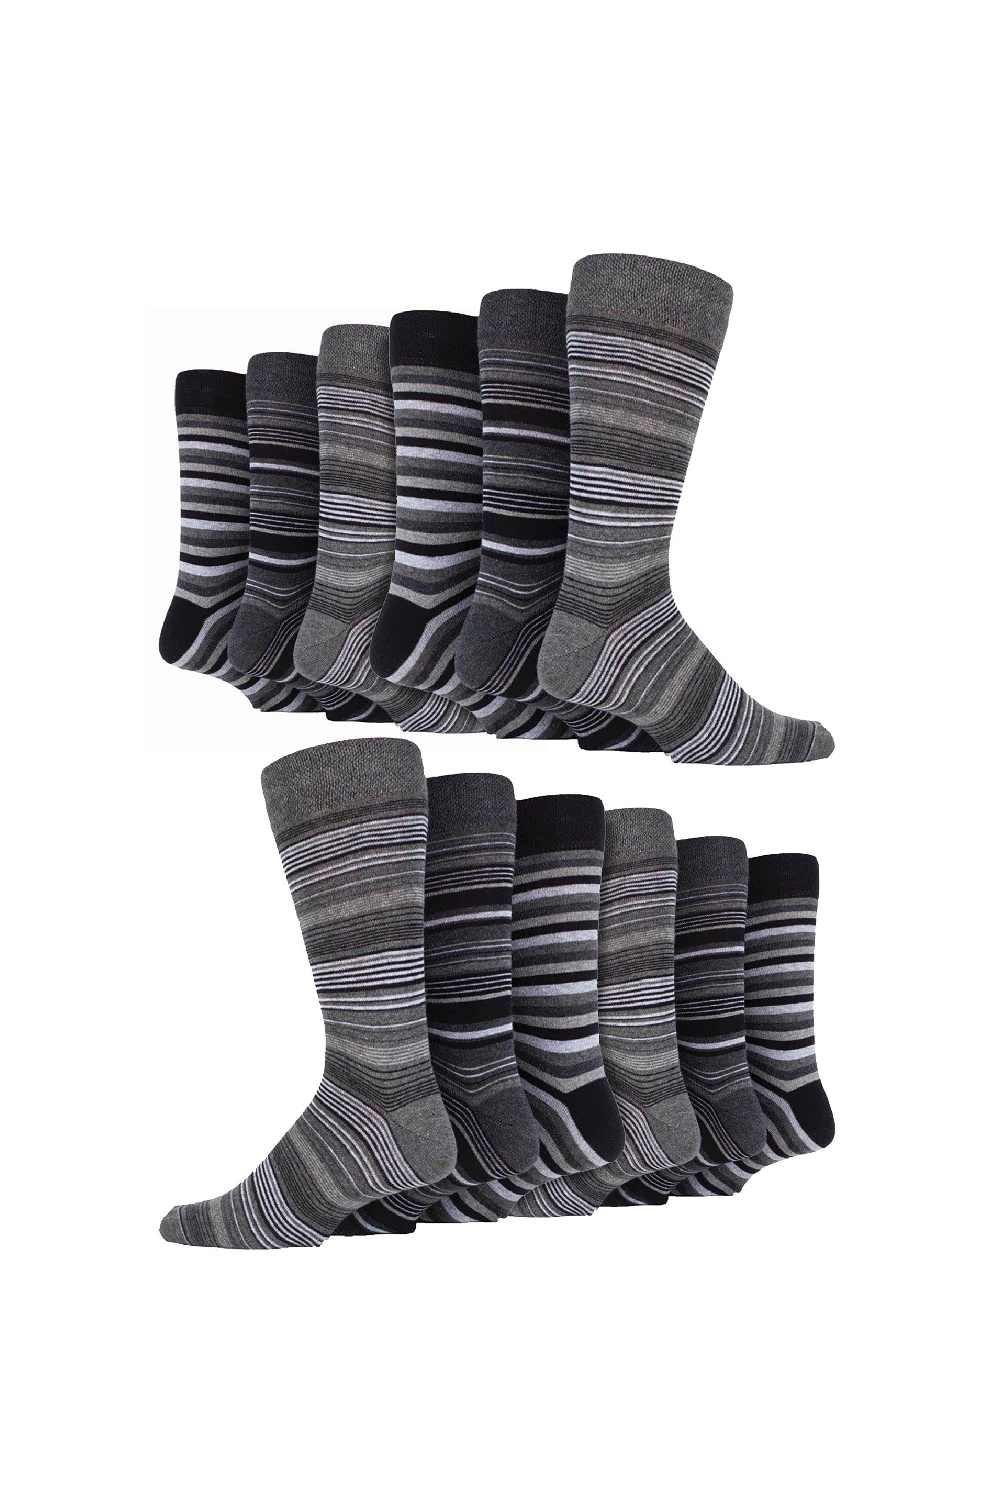 12 Pair Multipack Cotton Colourful Striped Patterned Dress Socks